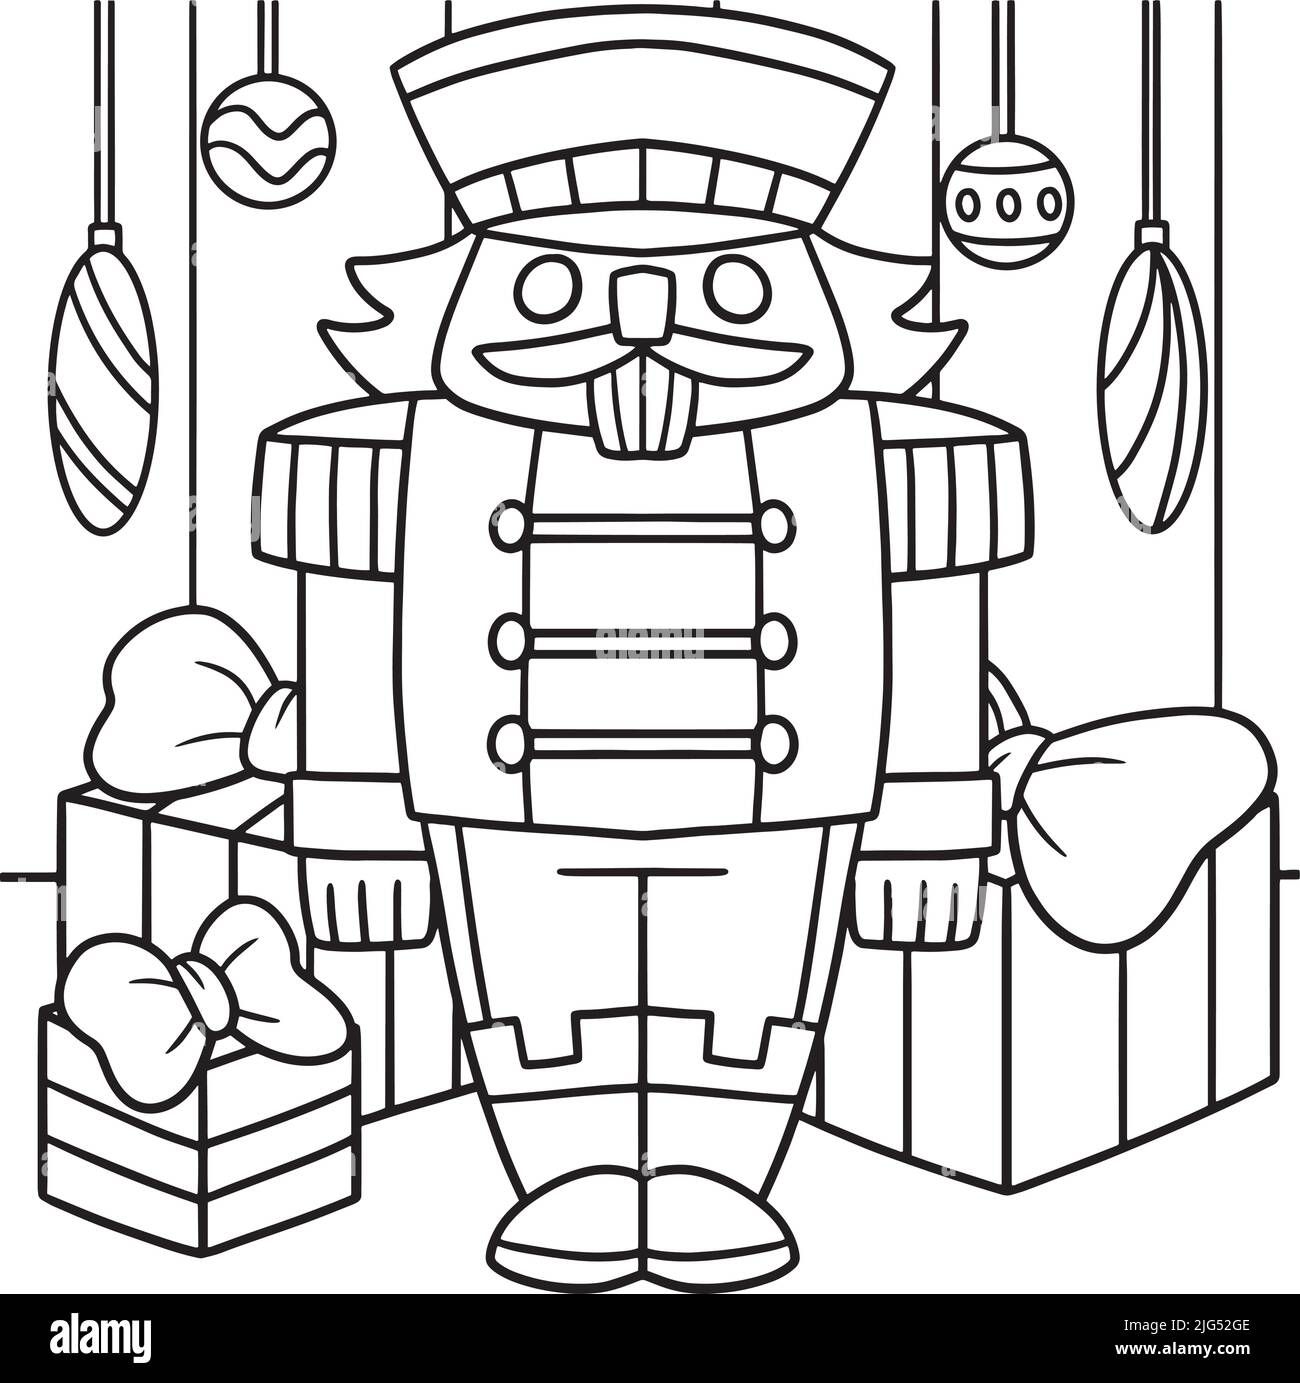 Nutcracker coloring page for kids stock vector image art